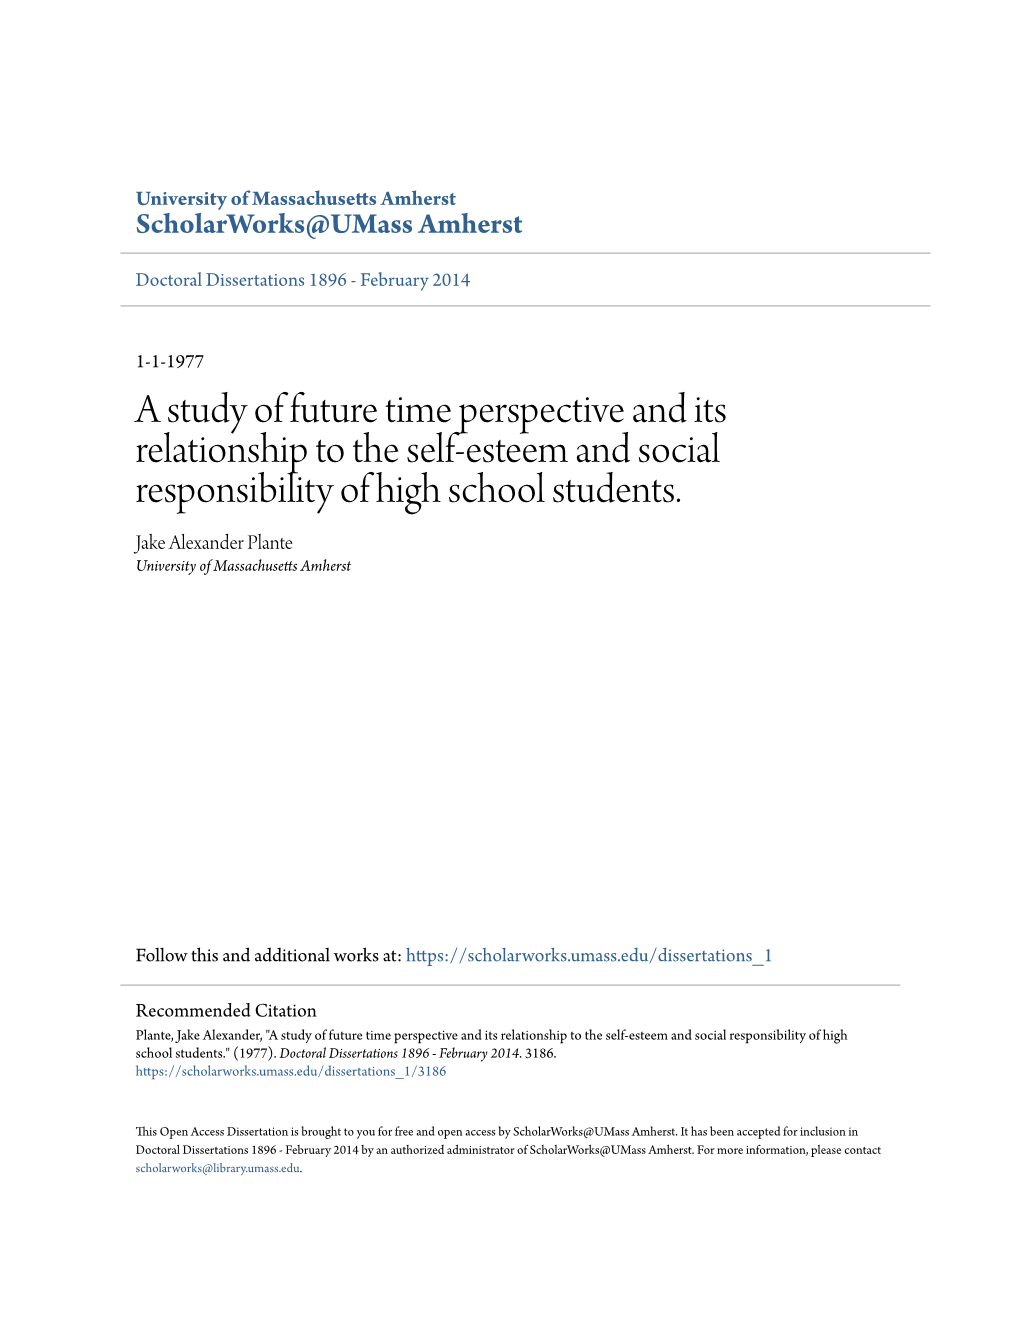 A Study of Future Time Perspective and Its Relationship to the Self-Esteem and Social Responsibility of High School Students